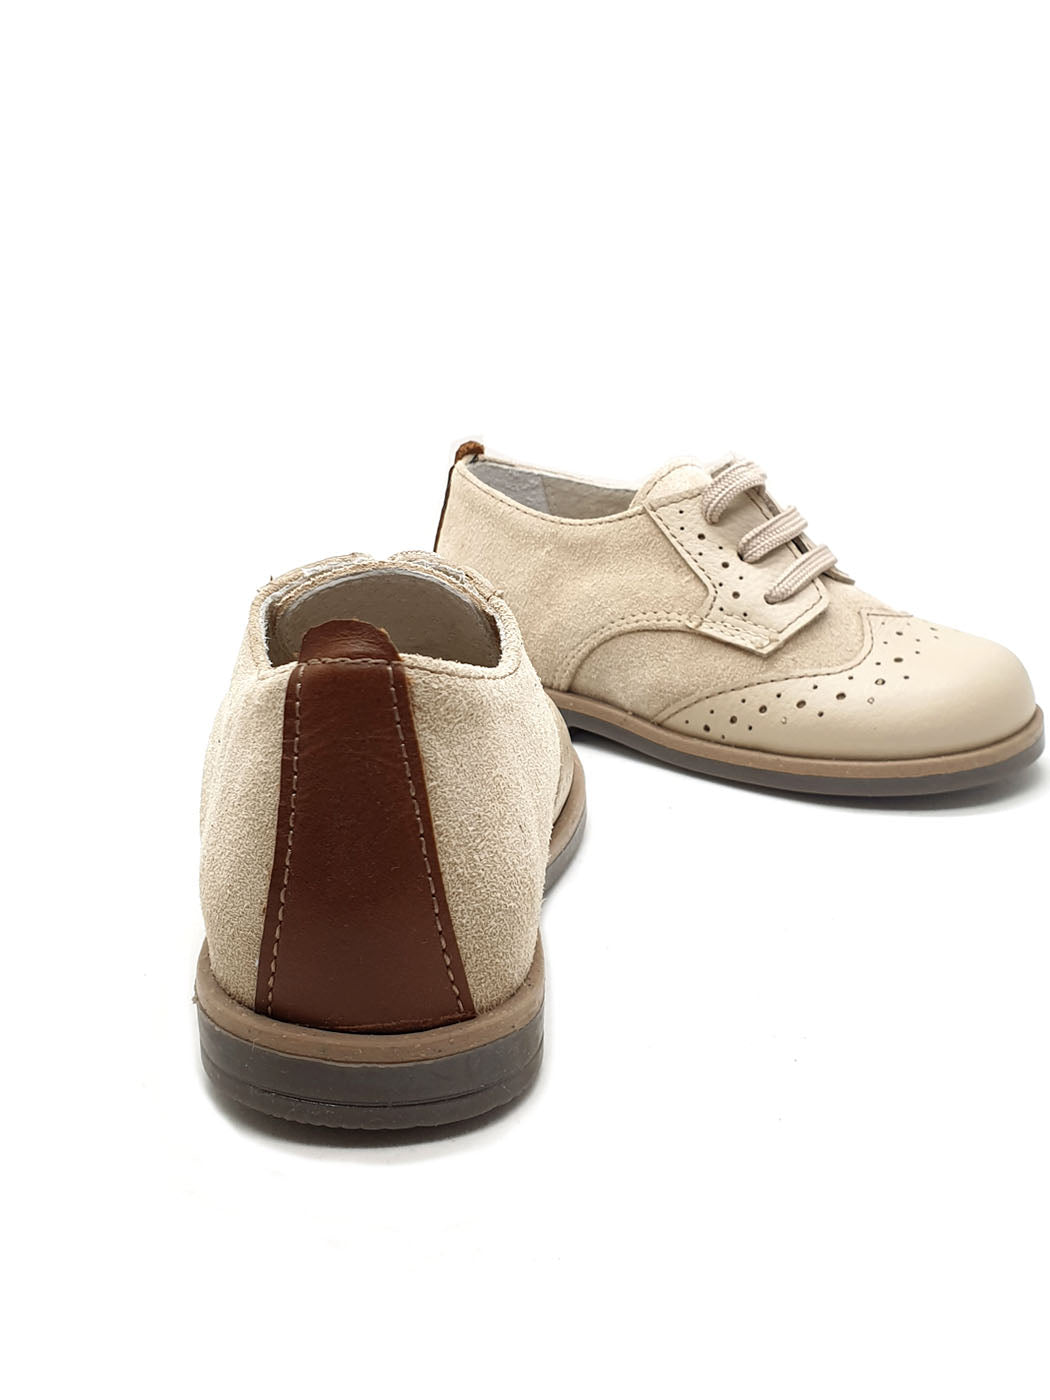 Baby Shoes Moccasins for boy - Beige